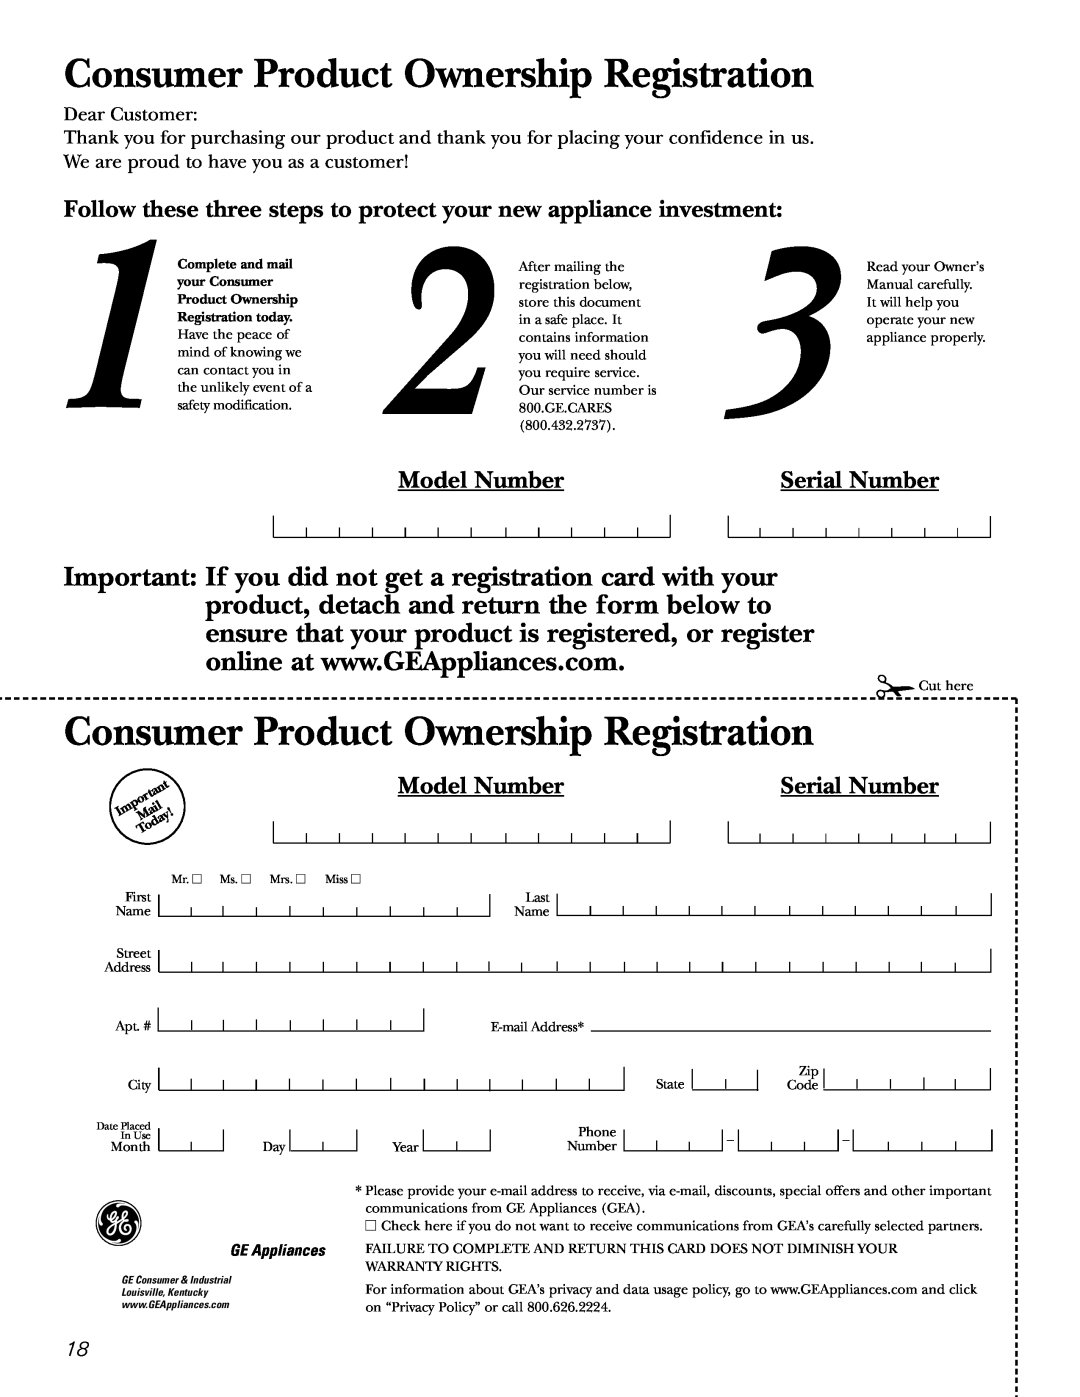 GE AGE21, AGE14 Model Number, Serial Number, Consumer Product Ownership Registration, GE Appliances, Complete and mail 